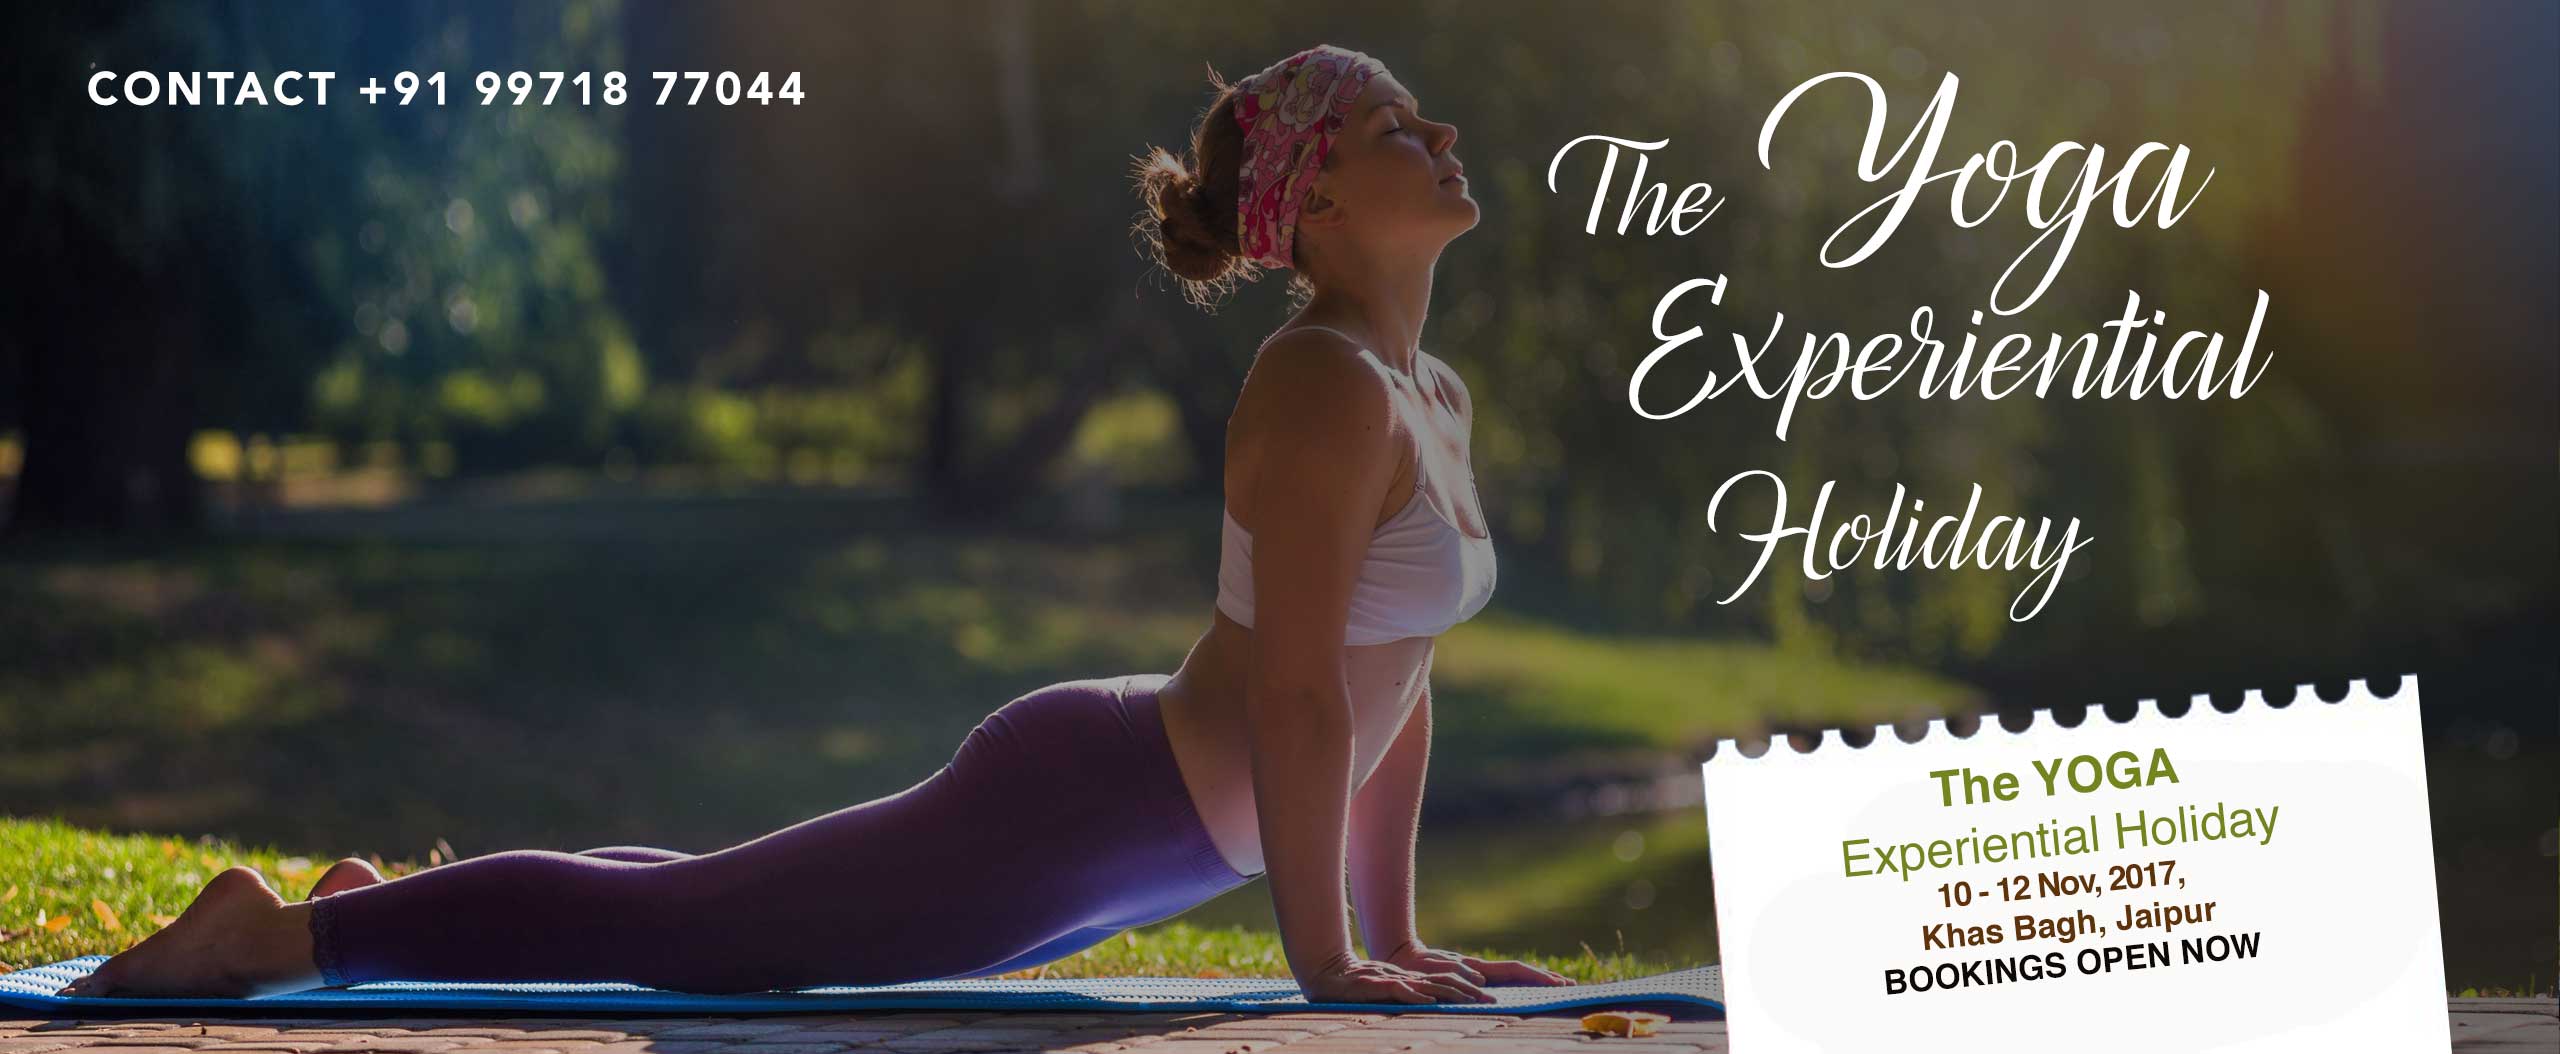 The Yoga Experiential Holiday